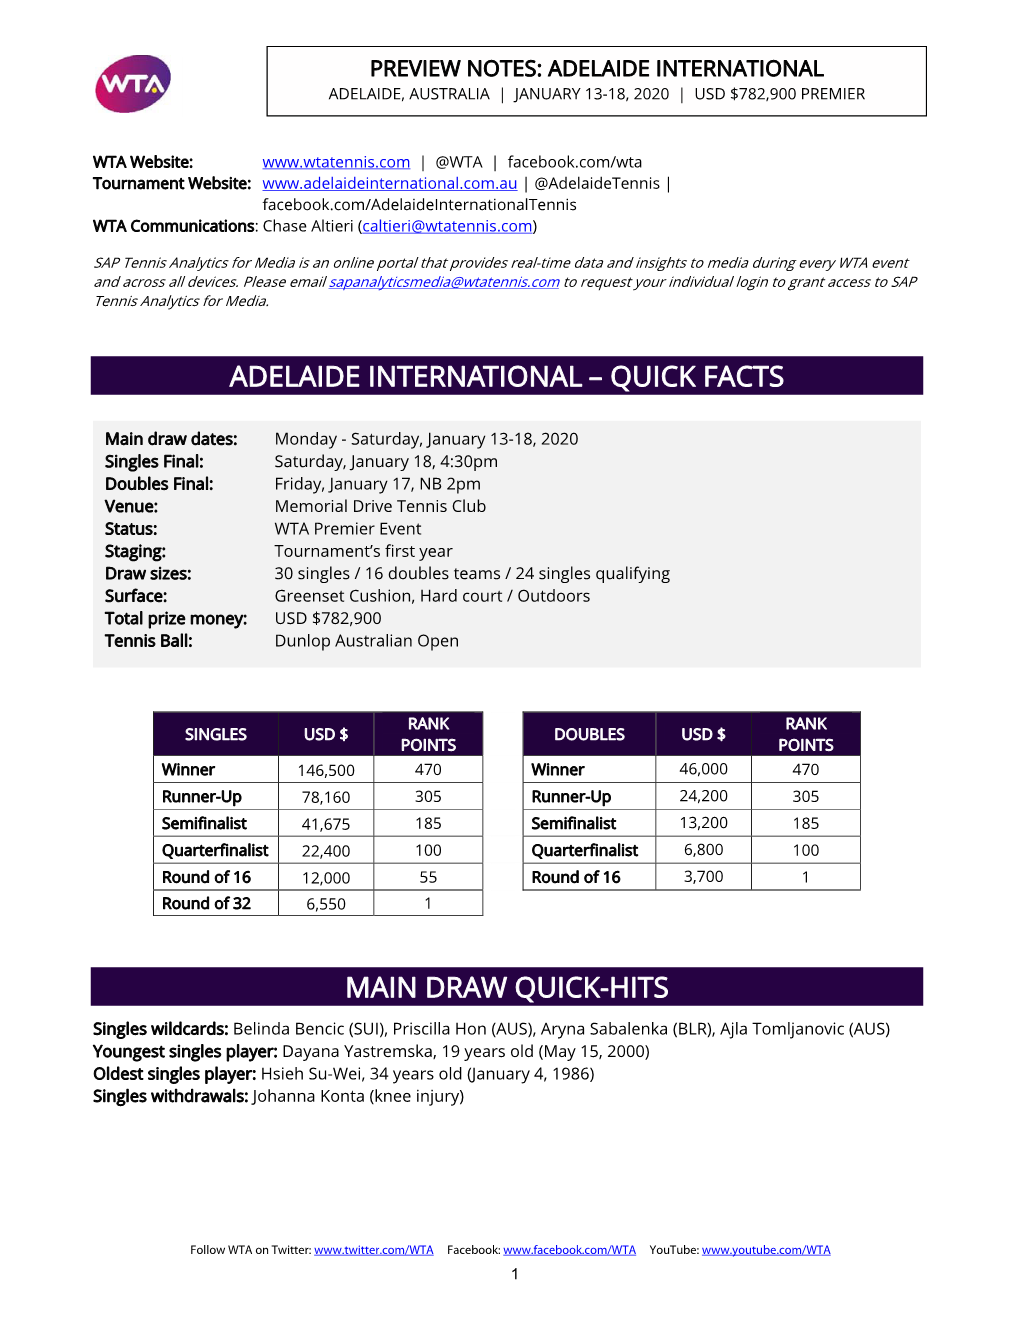 Adelaide International – Quick Facts Main Draw